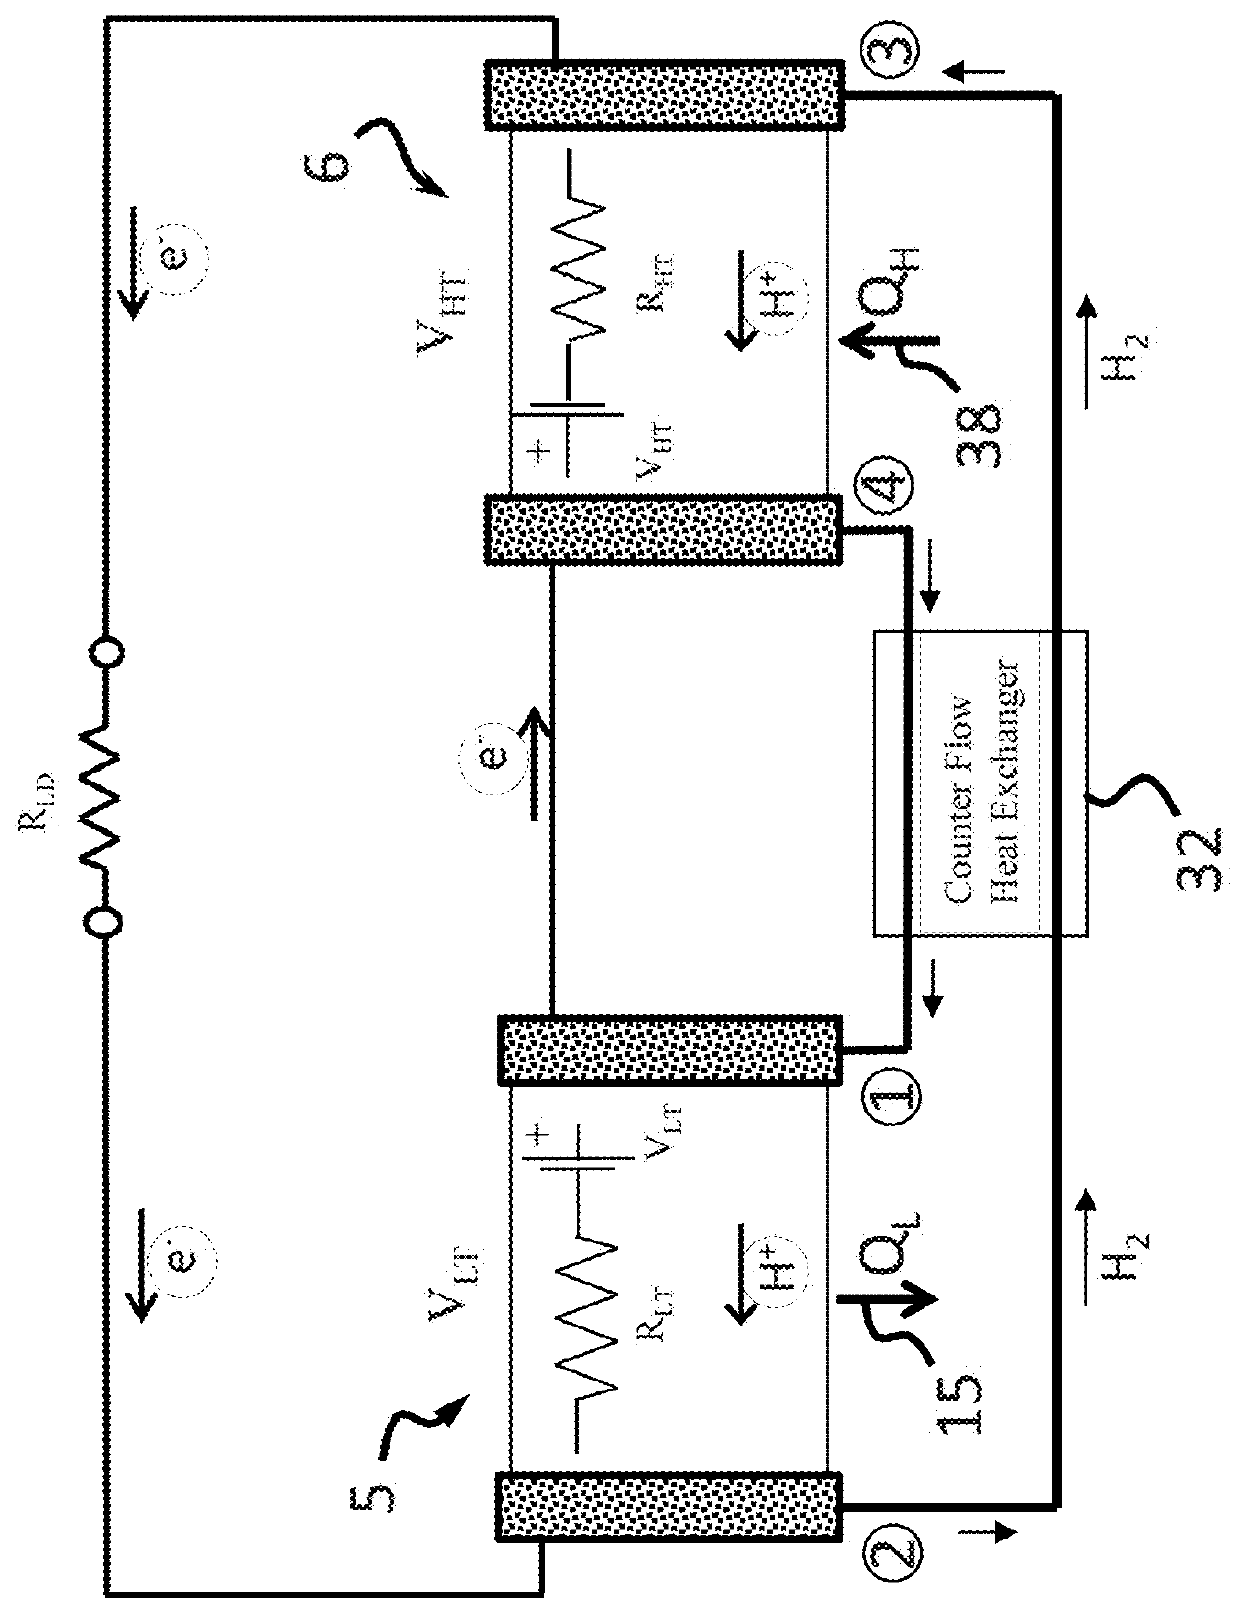 Thermo-electrochemical converter with integrated energy storage